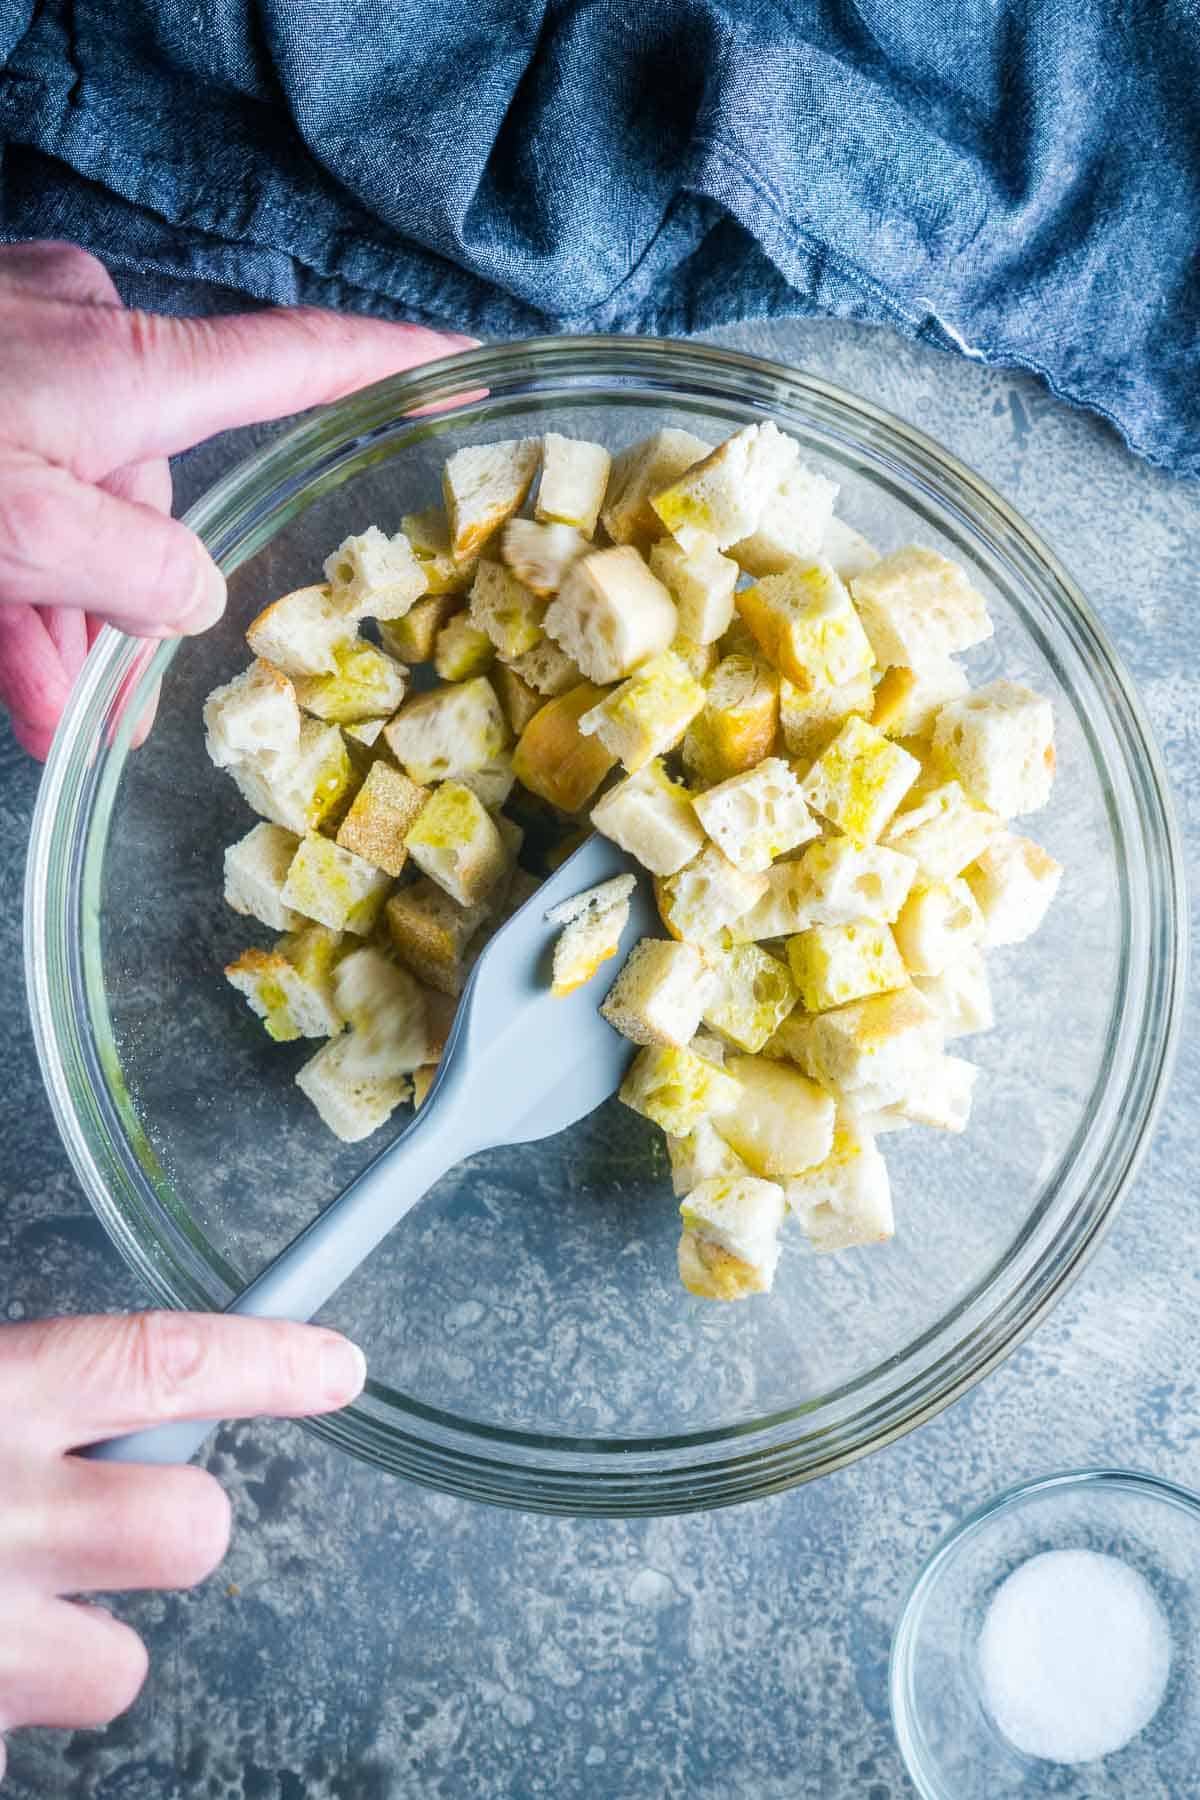 spatula stirs croutons in glass mixing bowl